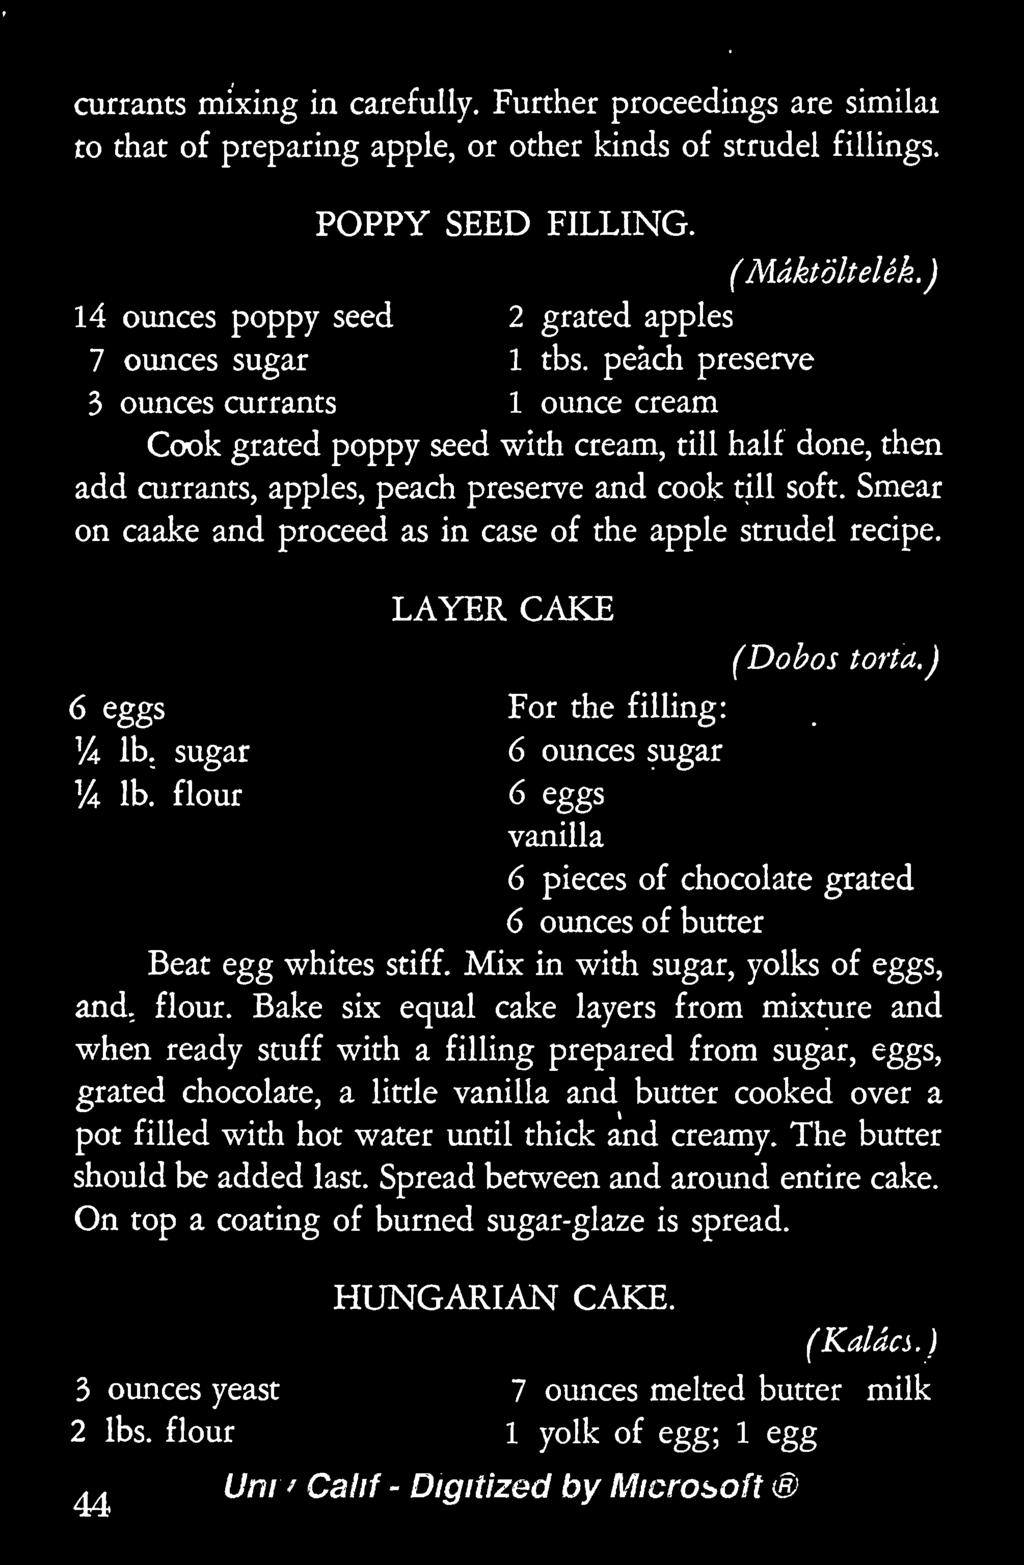 Smear on caake and proceed as in case of the apple strudel recipe. LAYER CAKE 6 eggs For the filling: 1/4 lb. sugar 6 ounces sugar 1/4 lb. flour 6 eggs vanilla (Dobos torta.